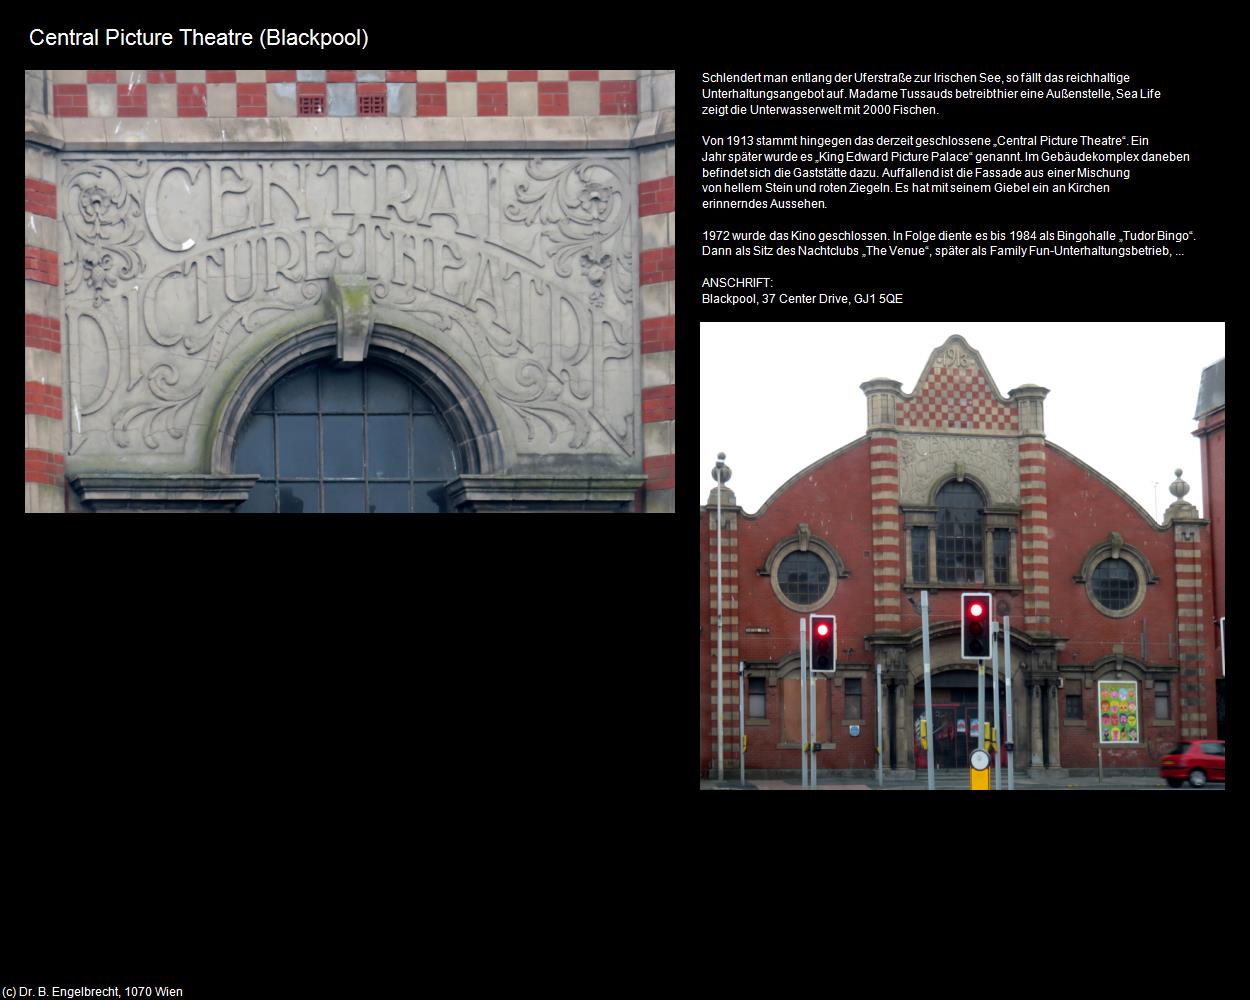 Central Picture Theatre (Blackpool, England ) in Kulturatlas-ENGLAND und WALES